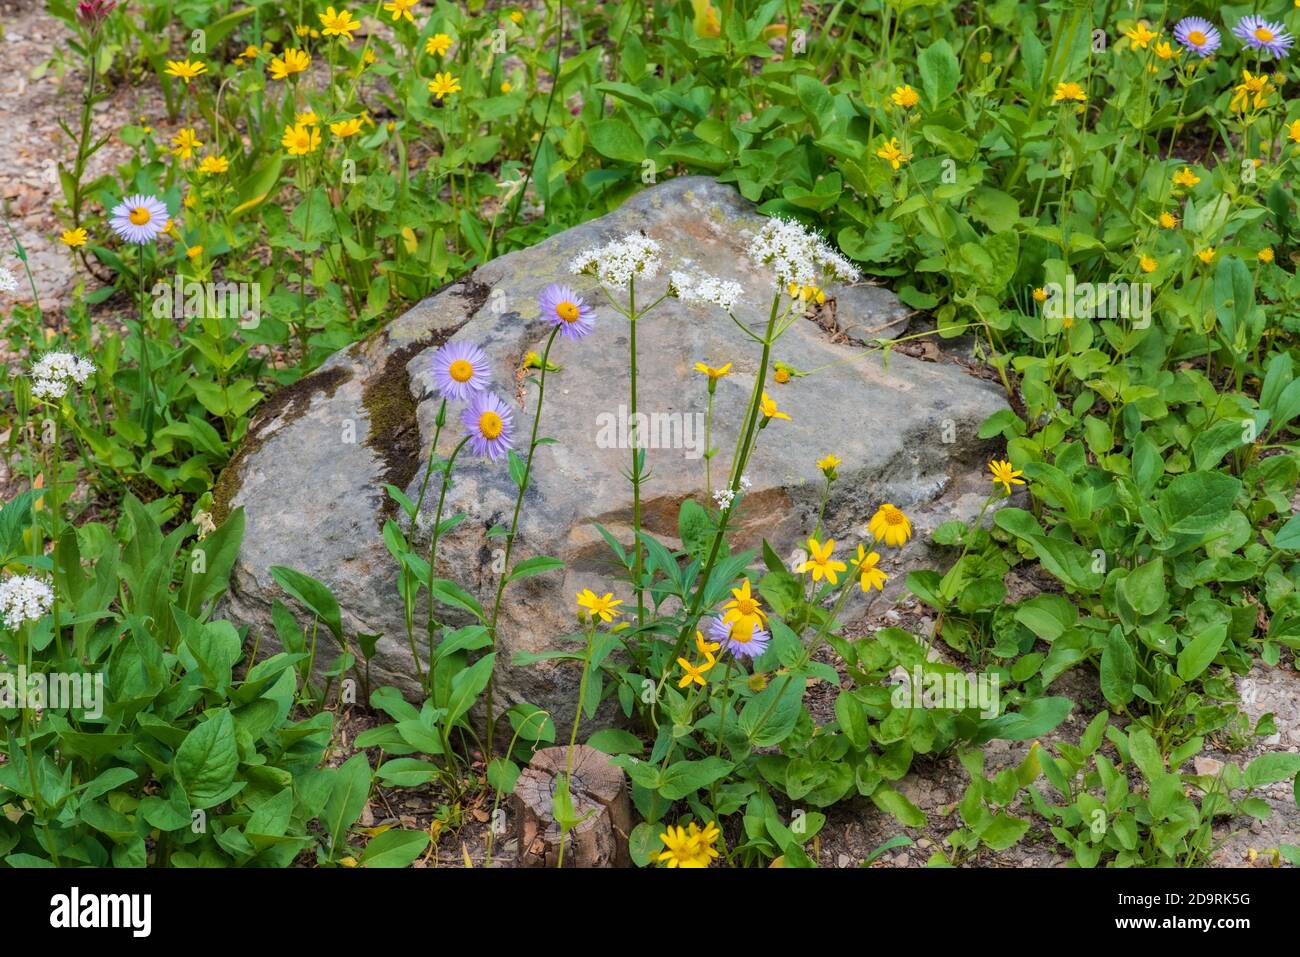 Wildflowers and a Rock in the Mountains Stock Photo